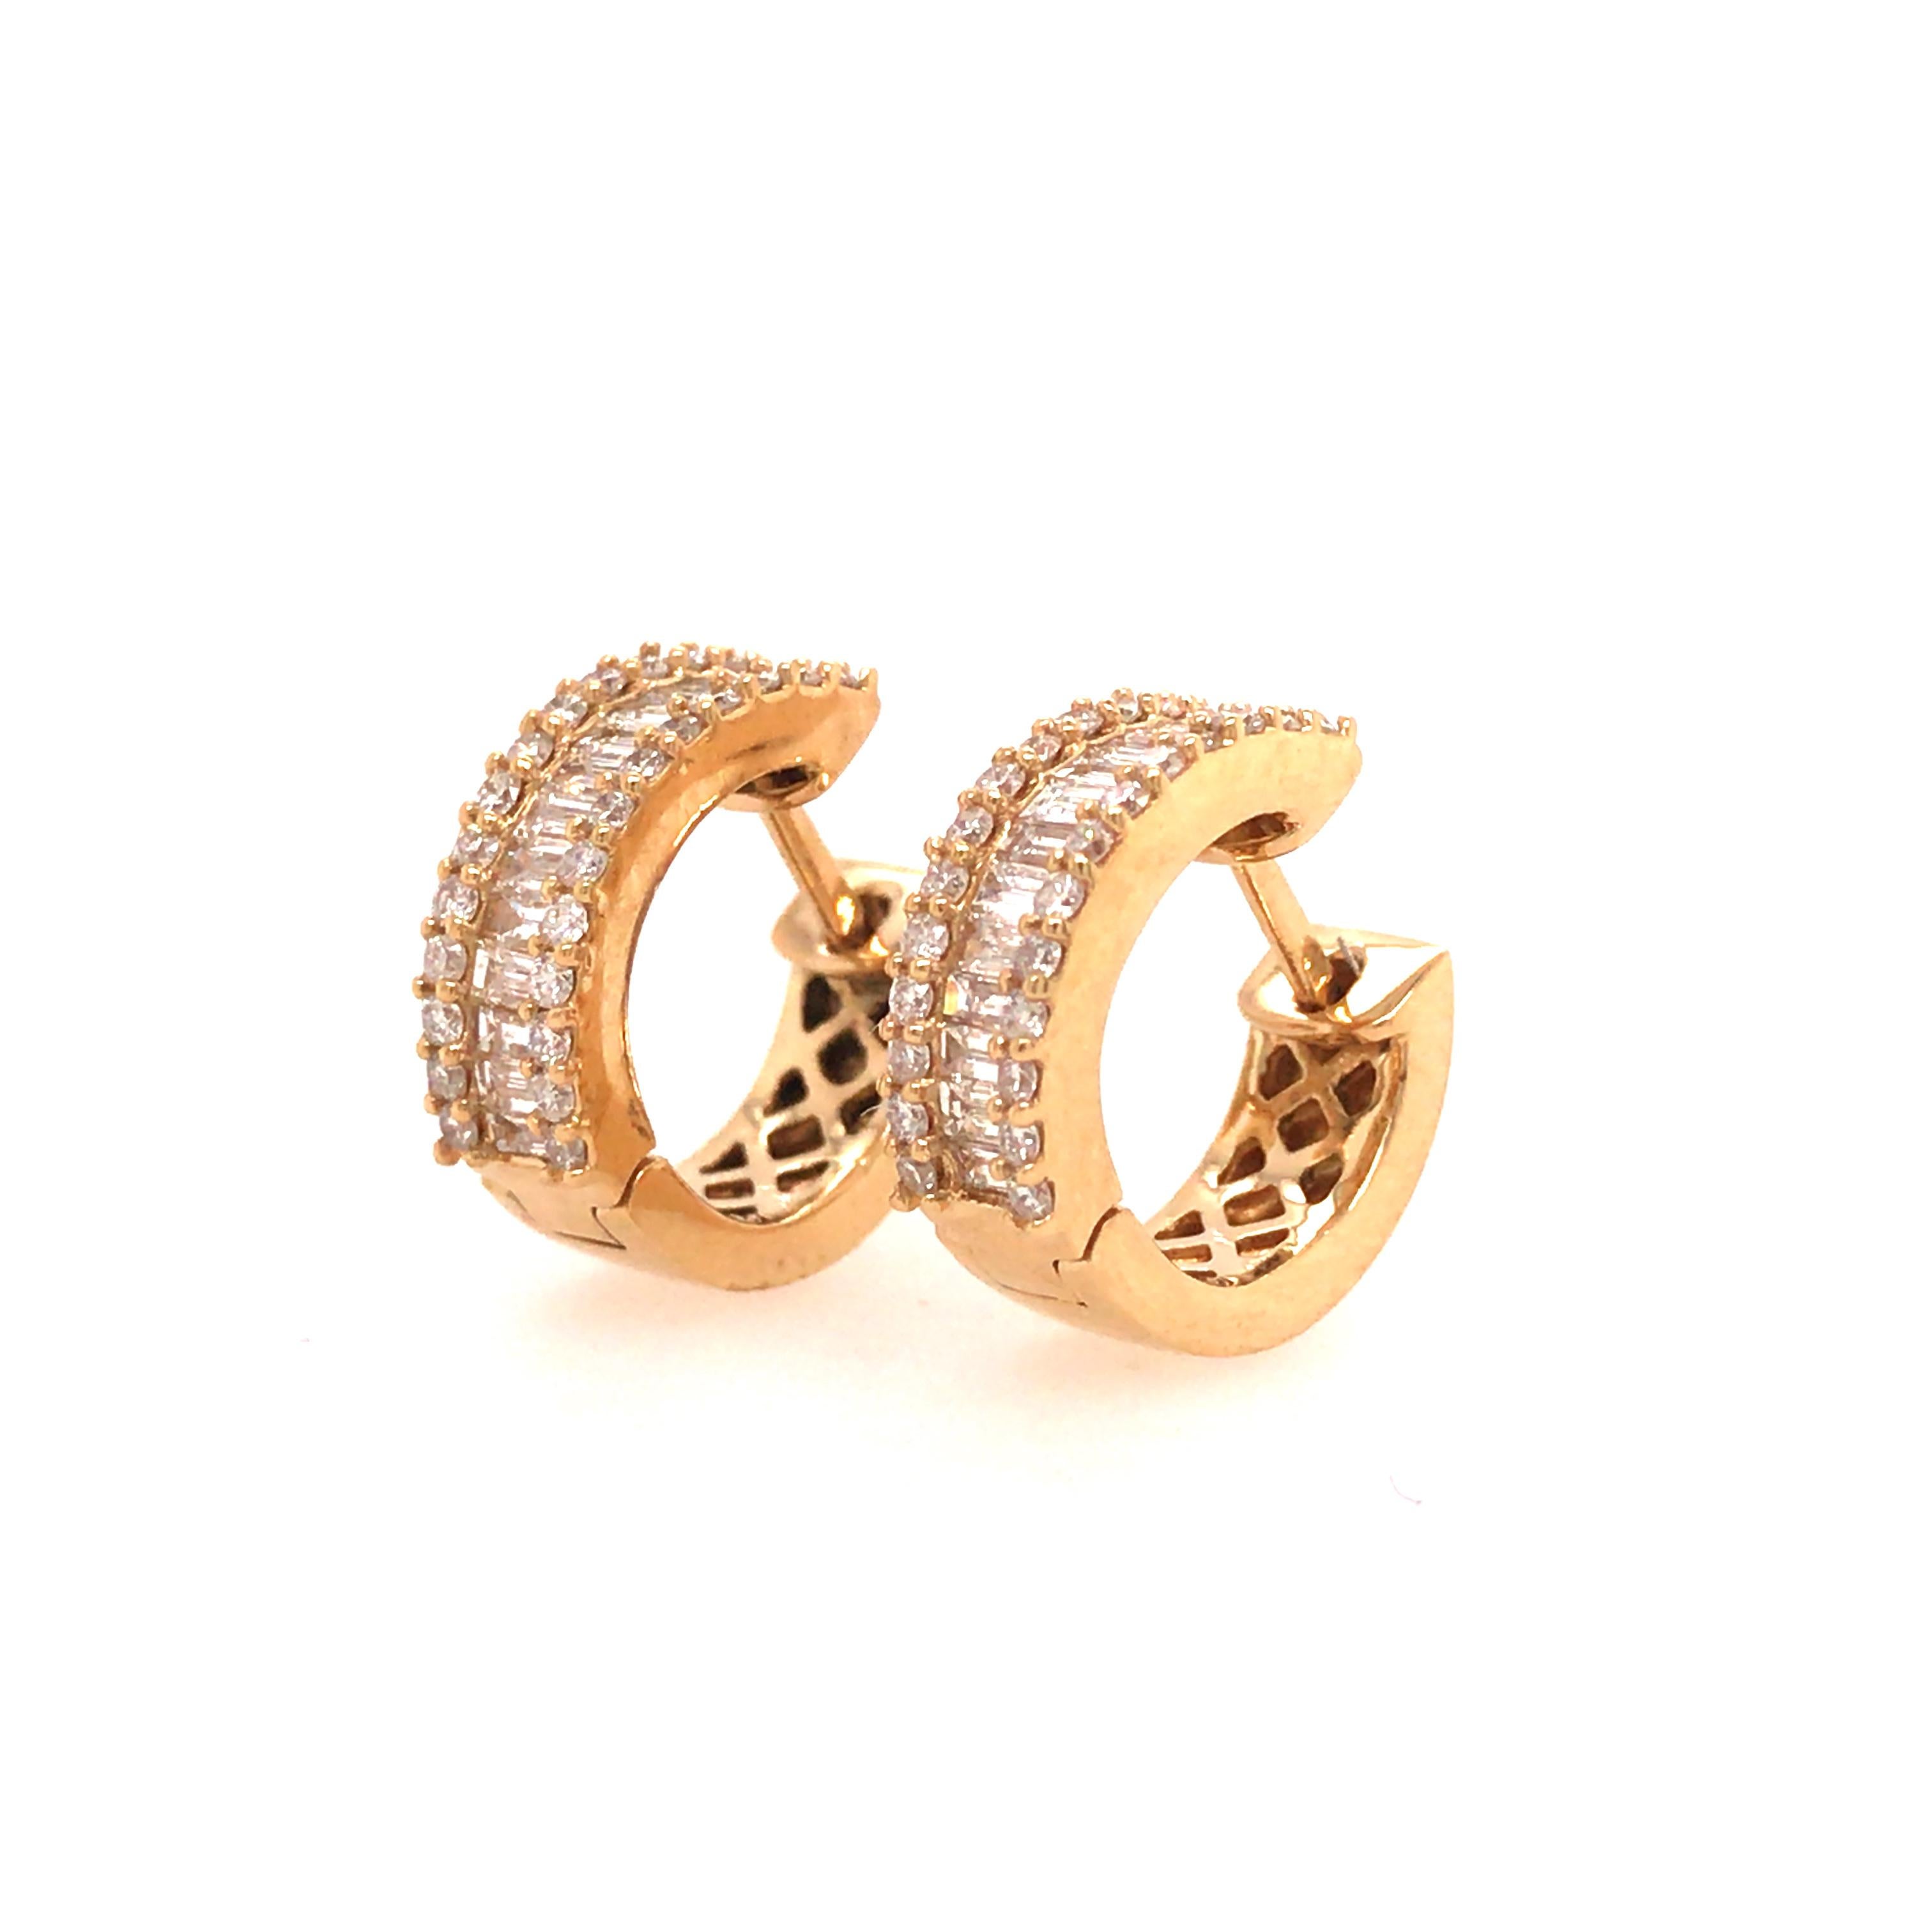 Small Diamond Huggie in 18K Yellow Gold.  (52) Round Brilliant Cut and (26) Baguette Diamonds weighing 0.66 carat total weight, G-H in color and VS in clarity are expertly set.  The Earrings measure 1/2 inch and weigh 4.2 grams.